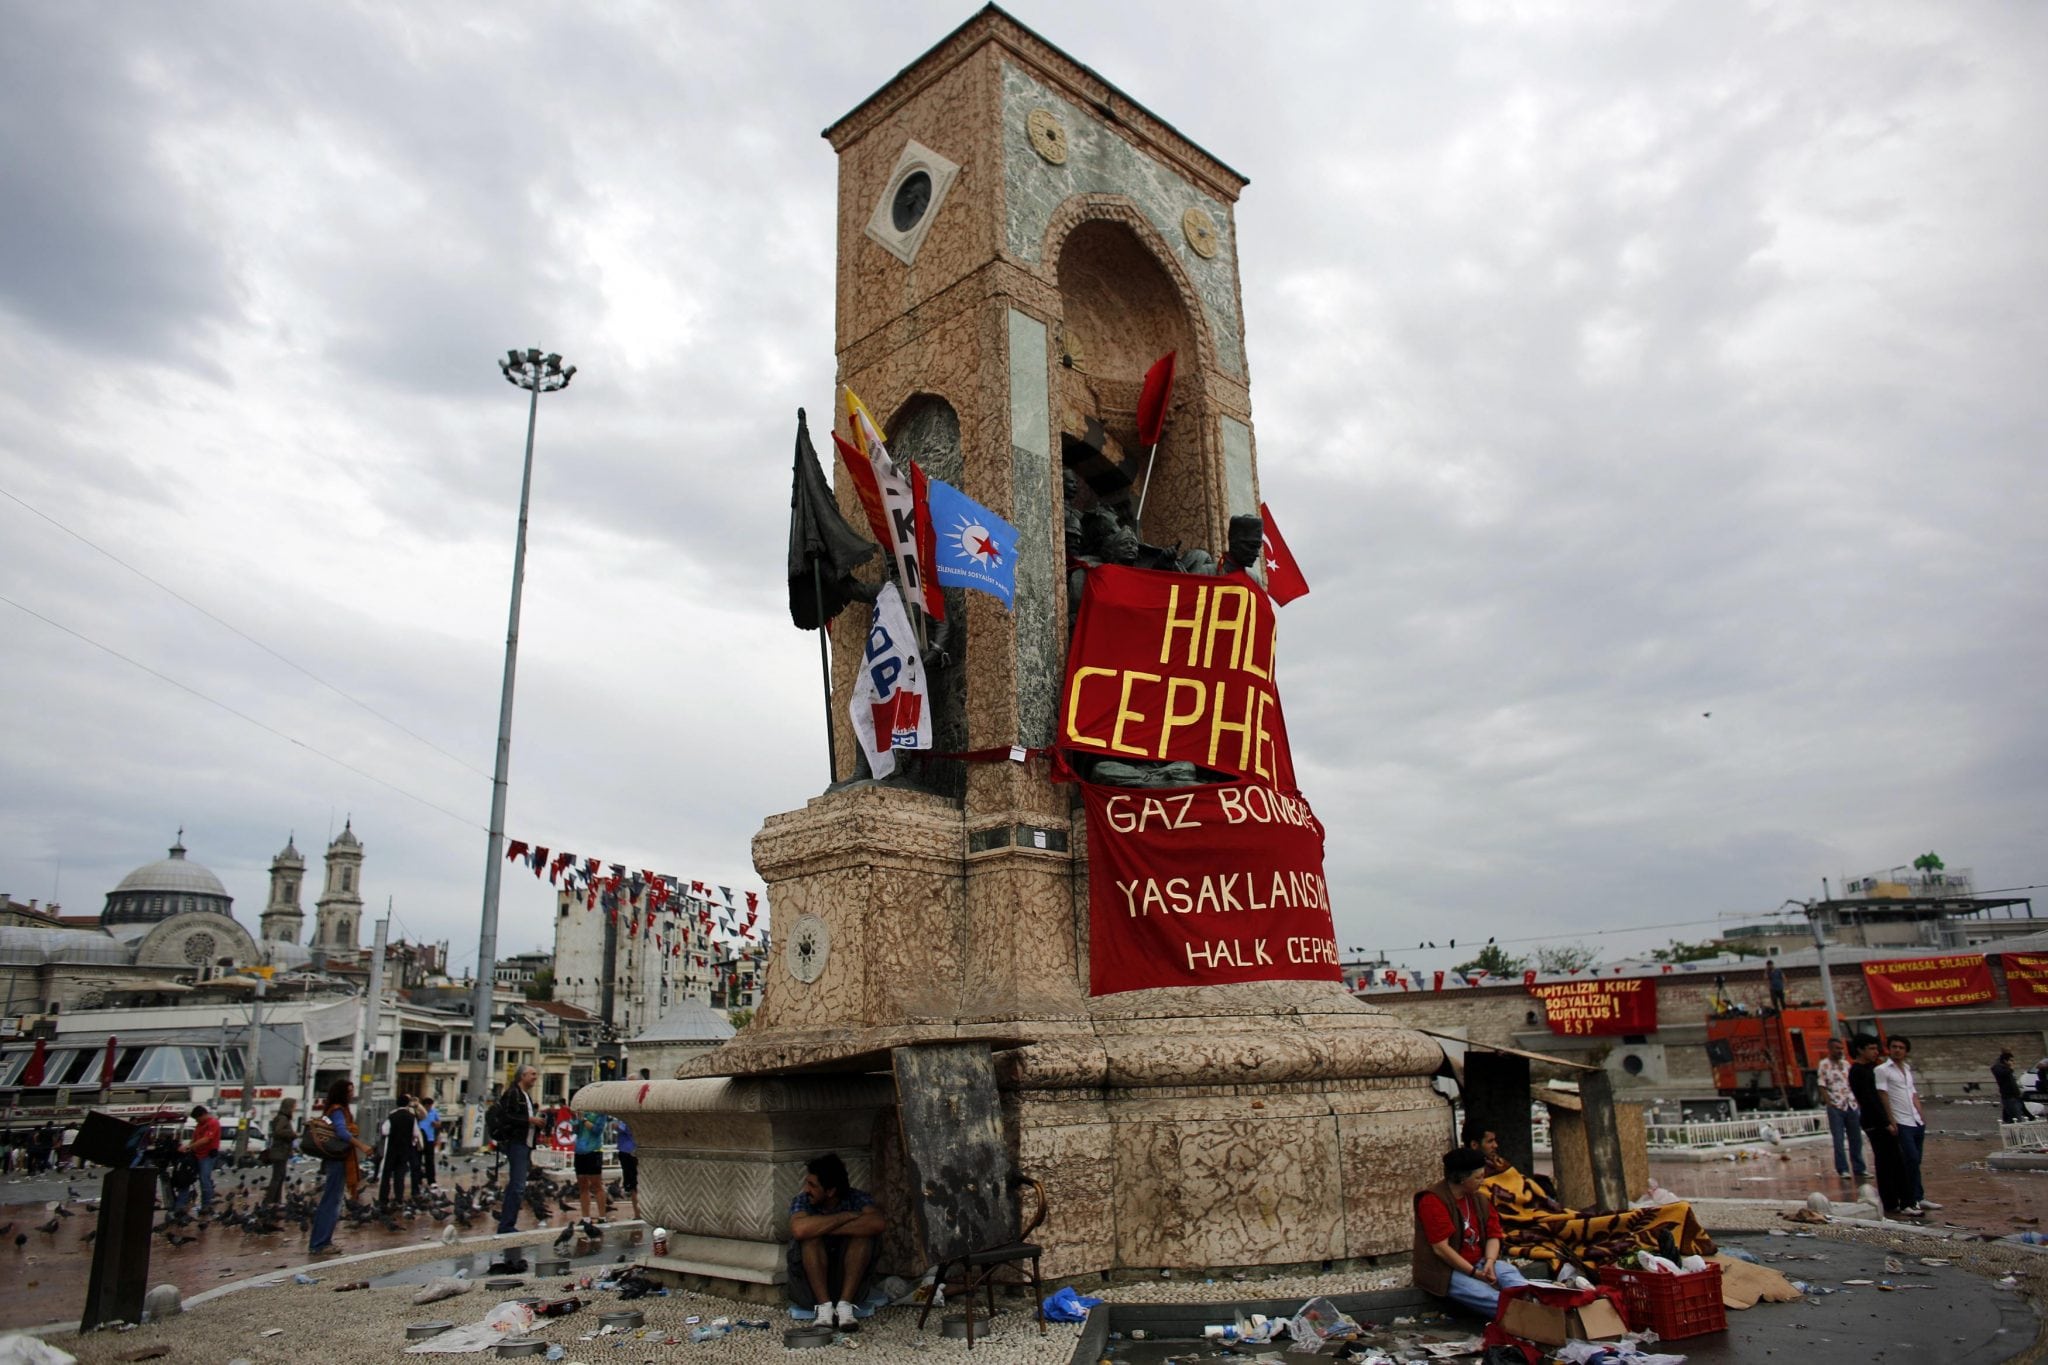 Demonstrators rest in Taksim Square where police and anti-government protesters clashed in central Istanbul June 2, 2013.